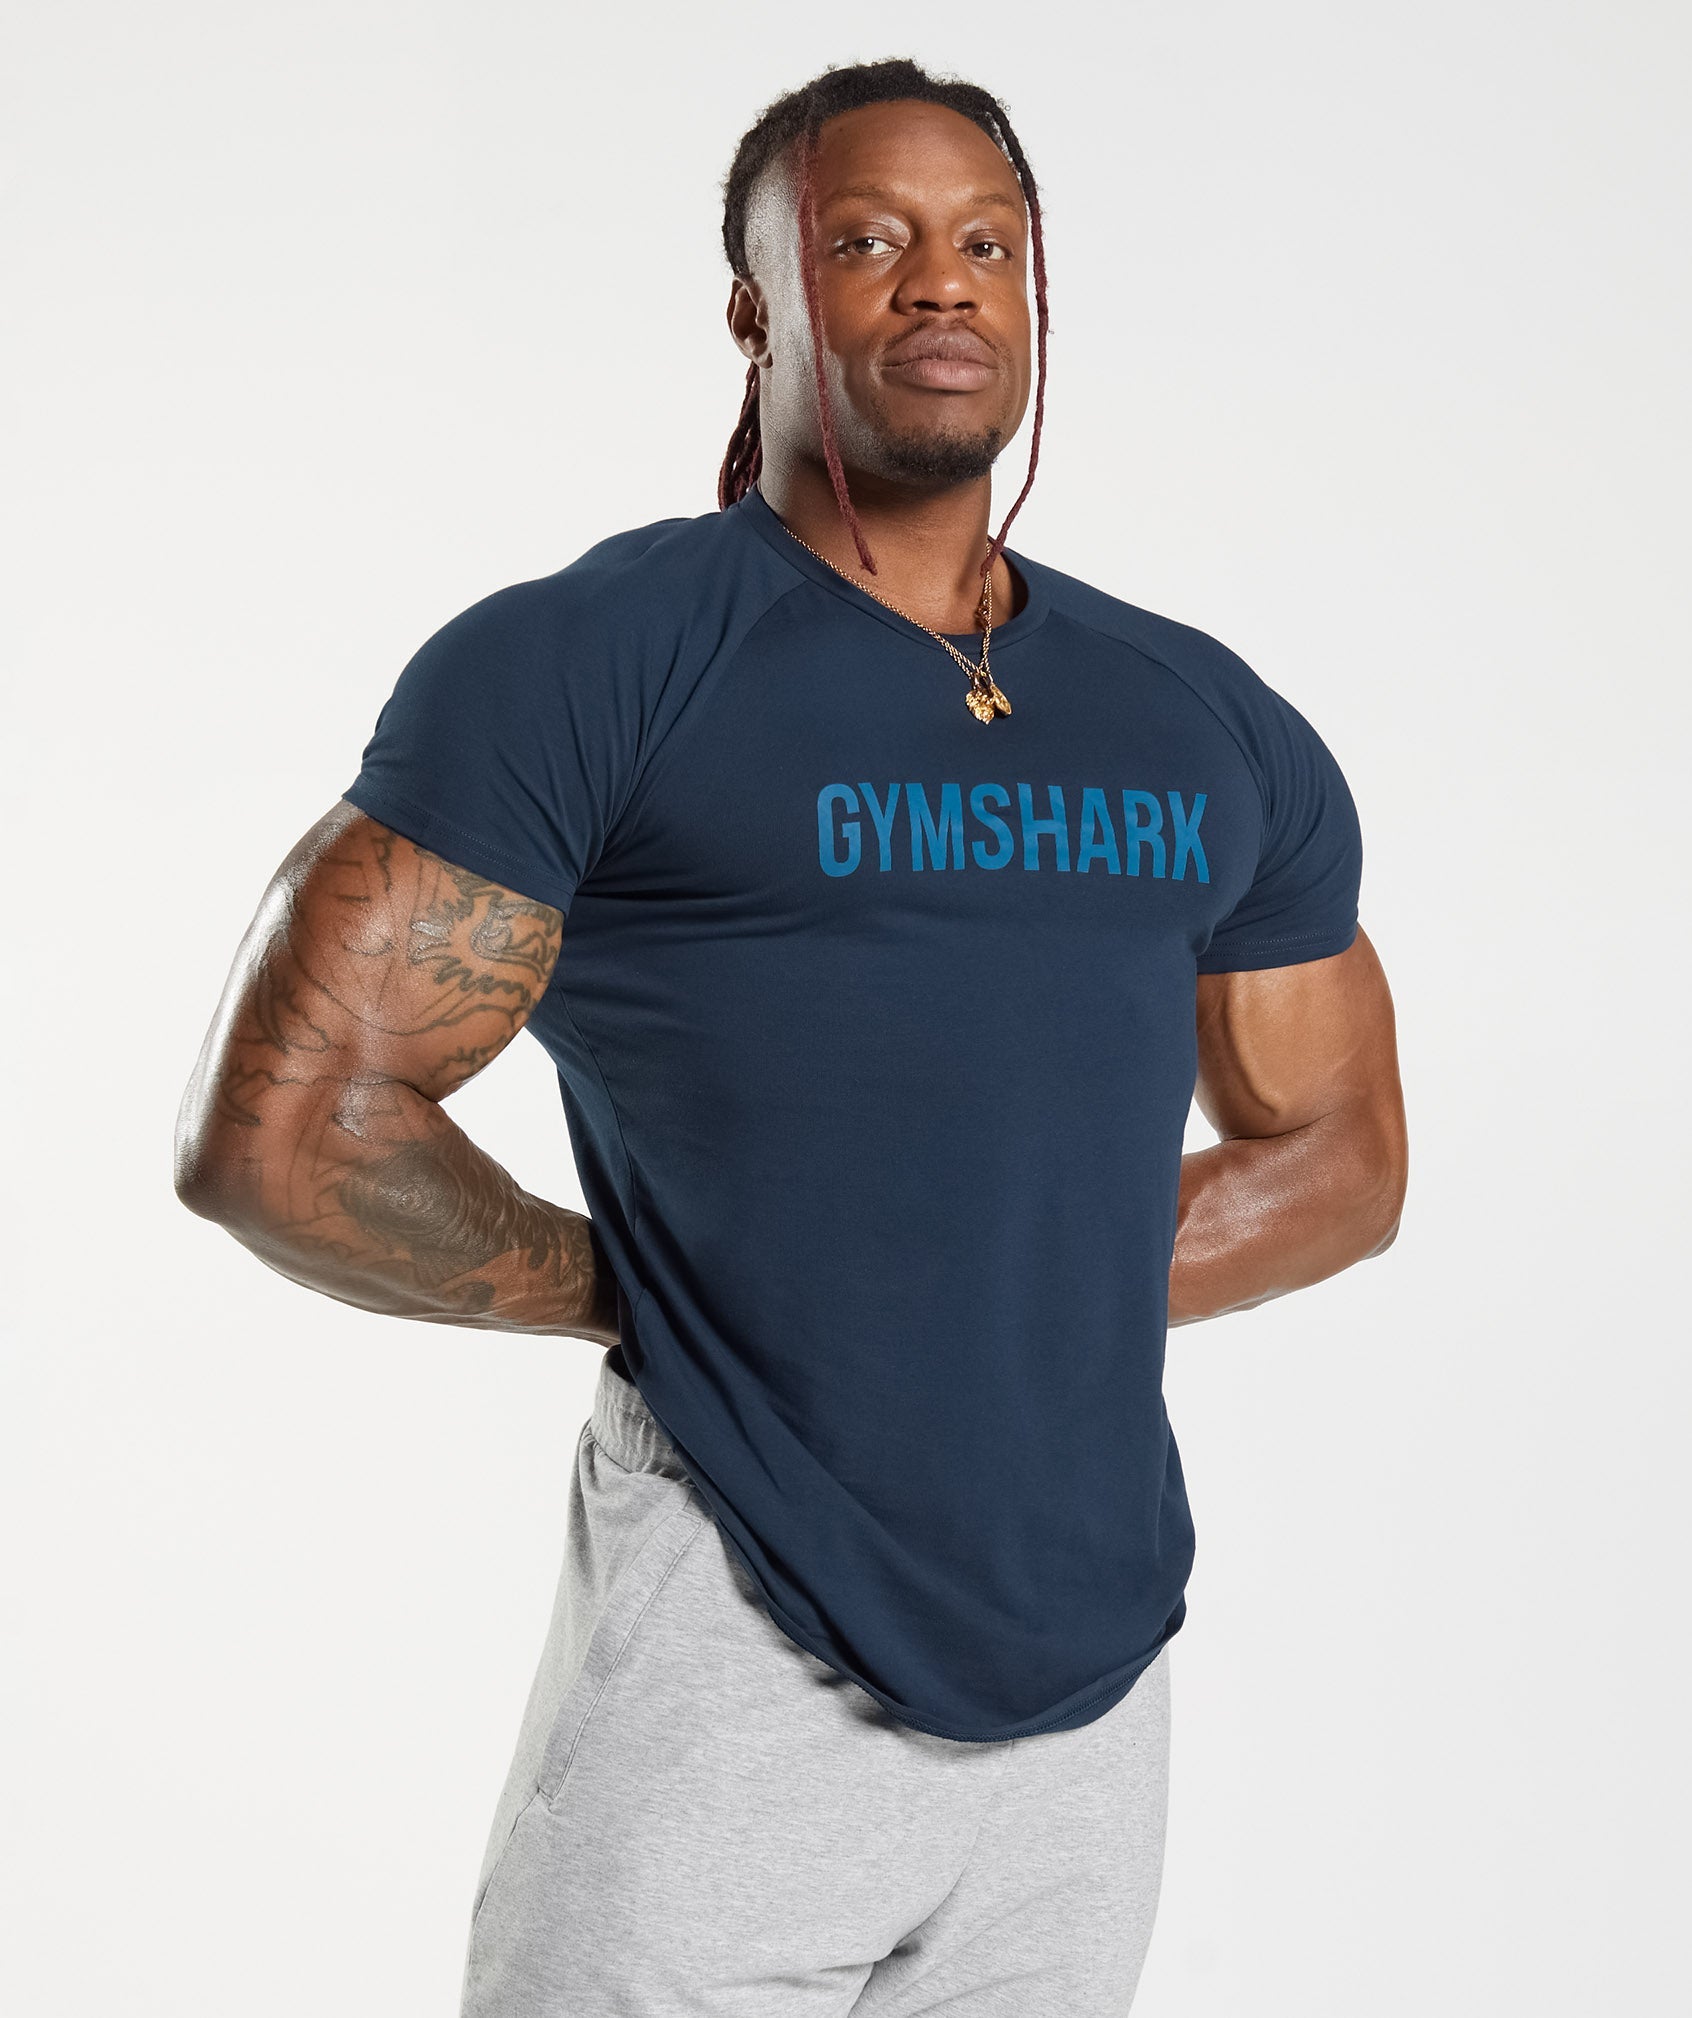 Outfit Of The Day - Gymshark Apollo T-Shirts! 🔥💪🦈 Time to spice up your  workout session with this lit Gymshark tee. The Apollo features a statement  design and a classic T-shirt fit.